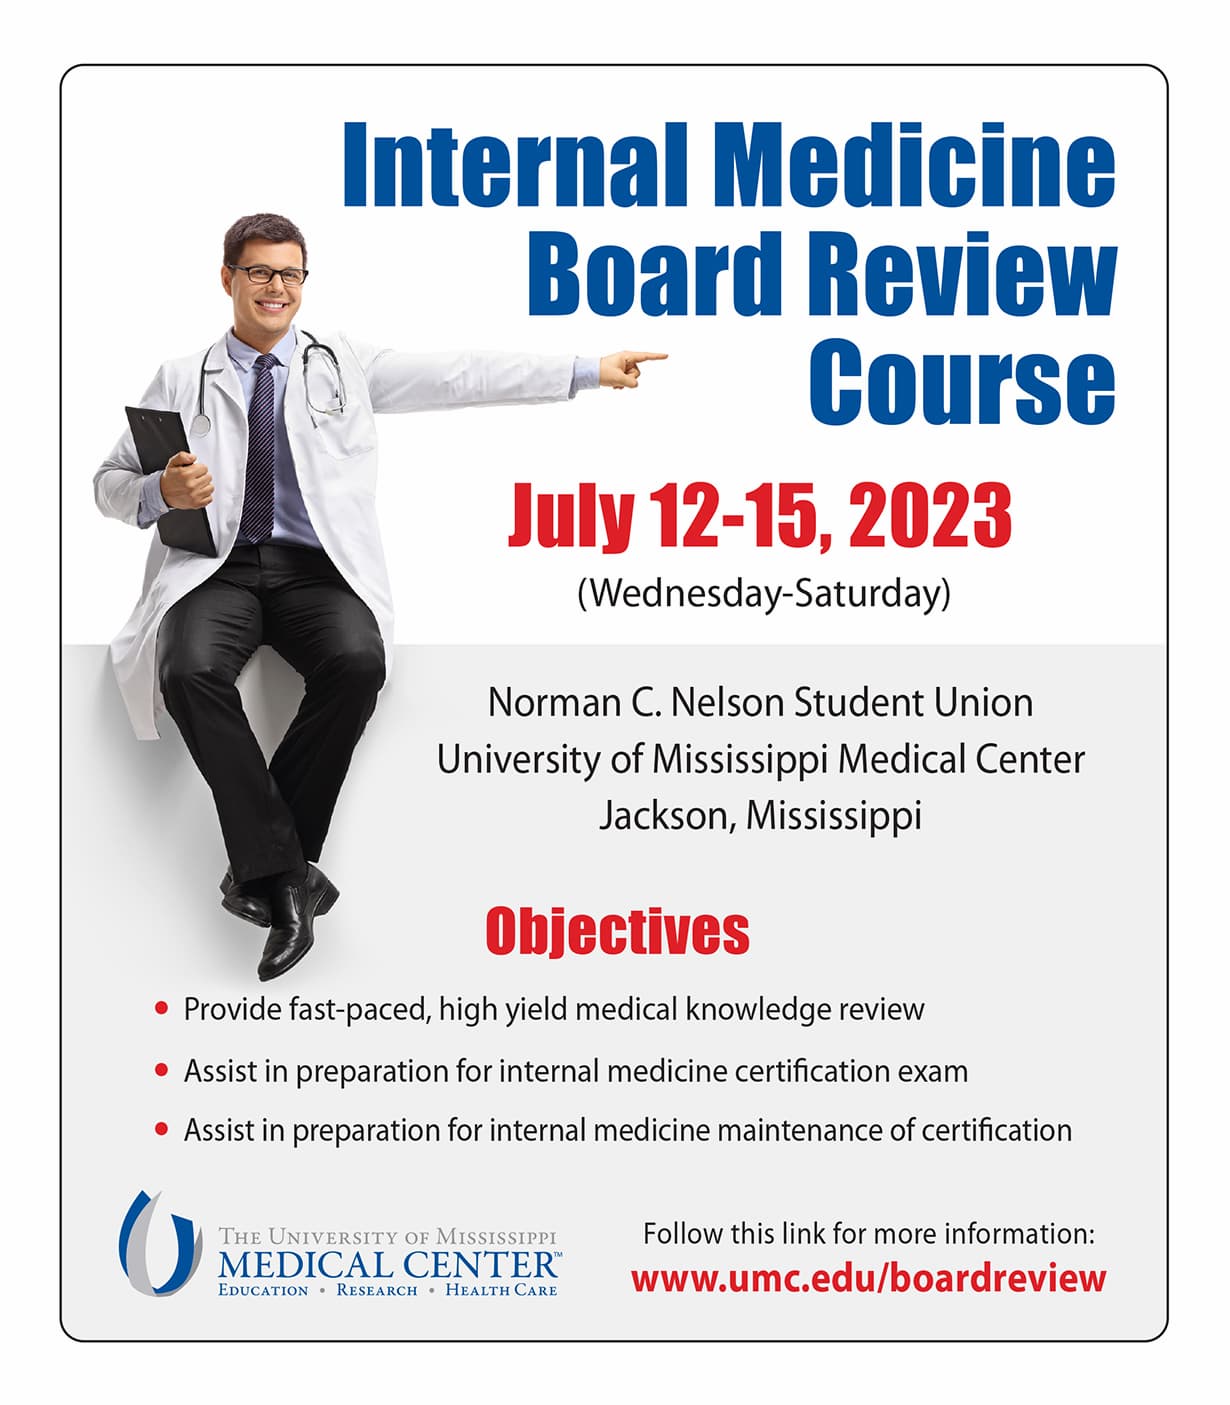 Doctor sitting on wall pointing to text that reads Internal Medicine Board Review Course, July 12-15, 2023 (Wednesday-Saturday), Norman C. Nelson Student Union, University of Mississippi Medical Center, Jackson, Mississippi. Objectives: Provide fast-paced, high yield medical knowledge review, Assist in preparation for internal medicine certification exam, Assist in preparation for internal medicine maintenance of certification. Follow this link for more information: www.umc.edu / board review.